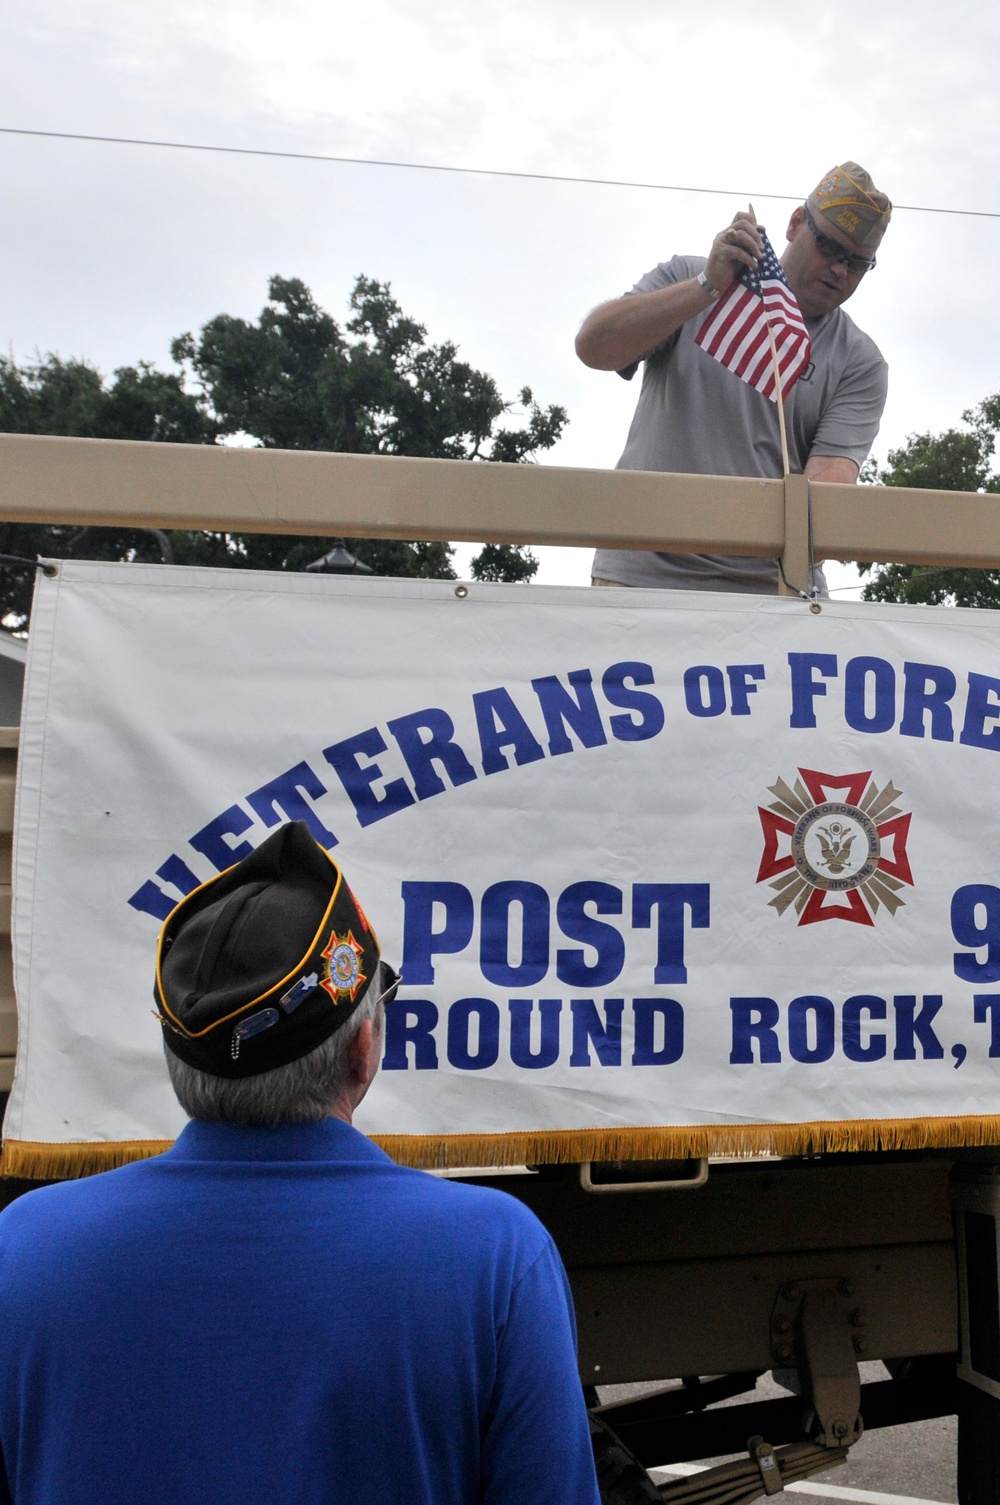 Texas Guardsmen support VFW for July Fourth parade